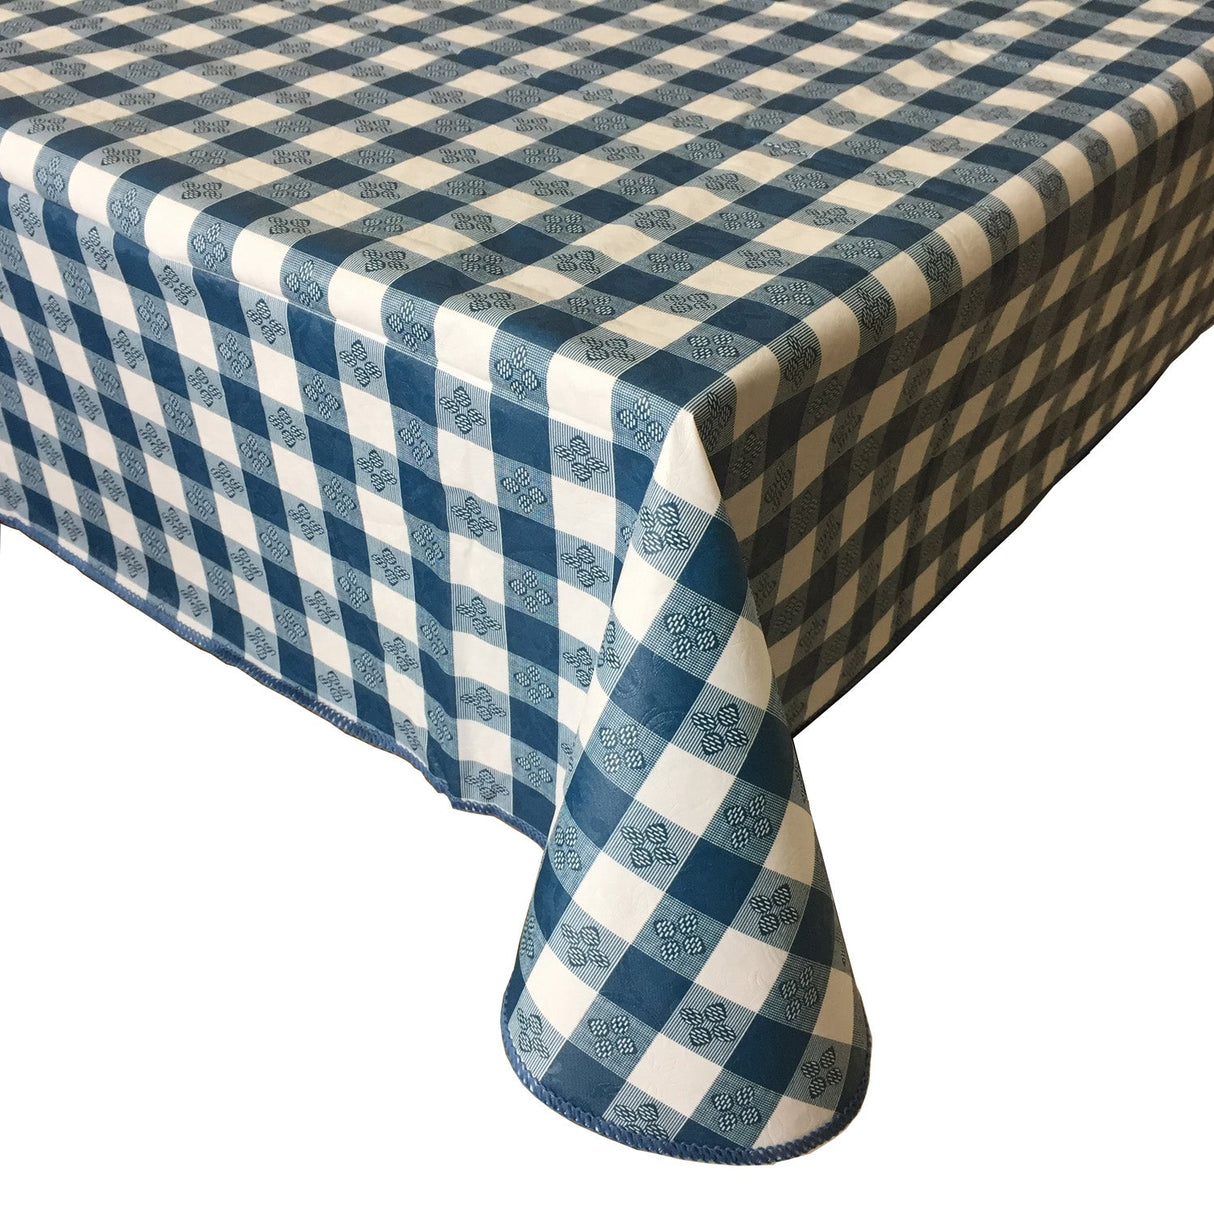 Table Cover Vinyl W/ Flannel Blue 52x52"